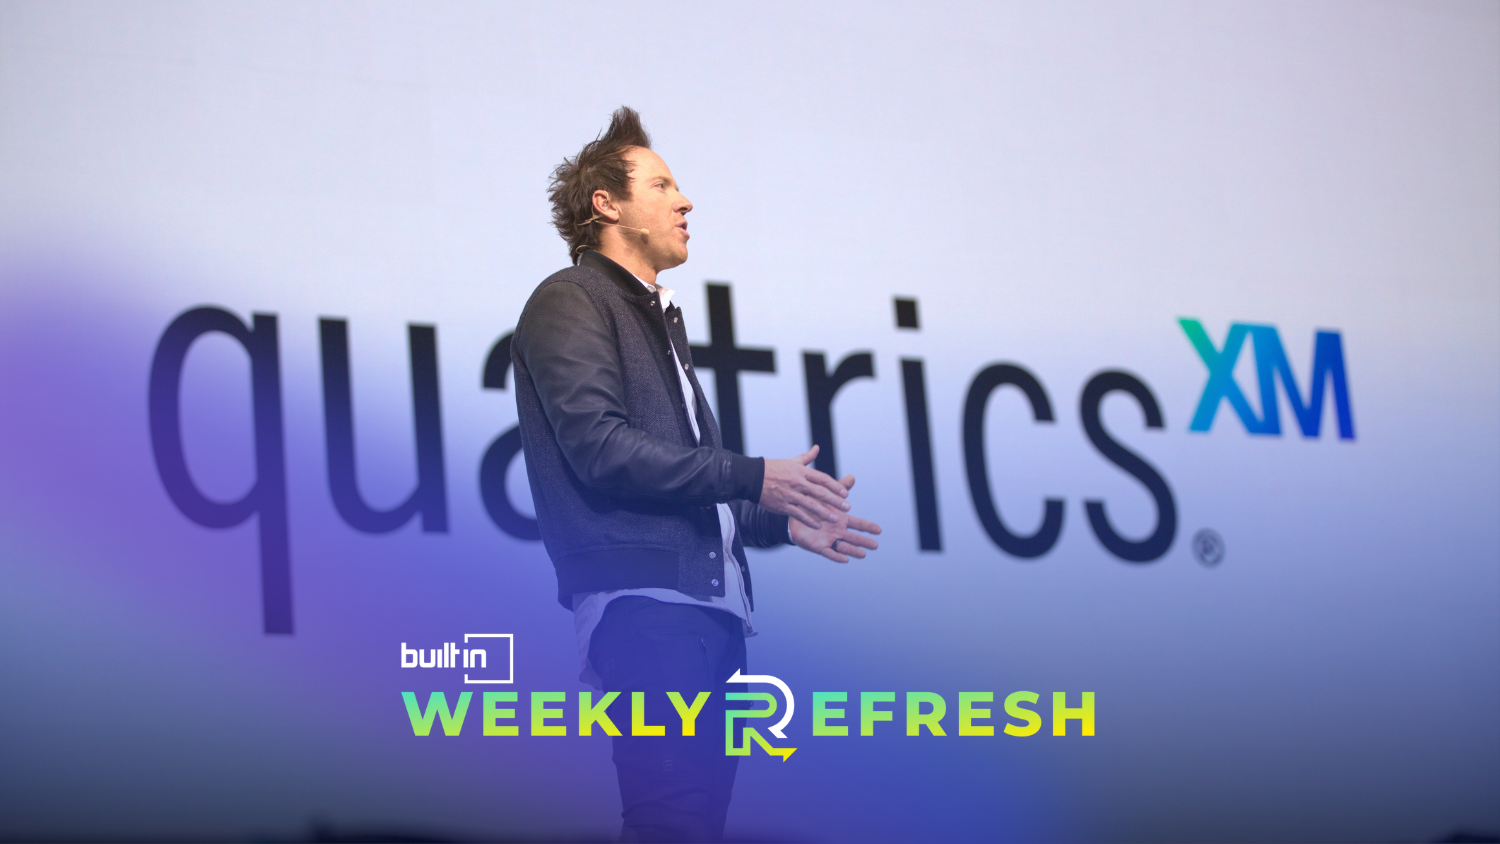 Qualtrics founder and executive chairman Ryan Smith speaking at an event.